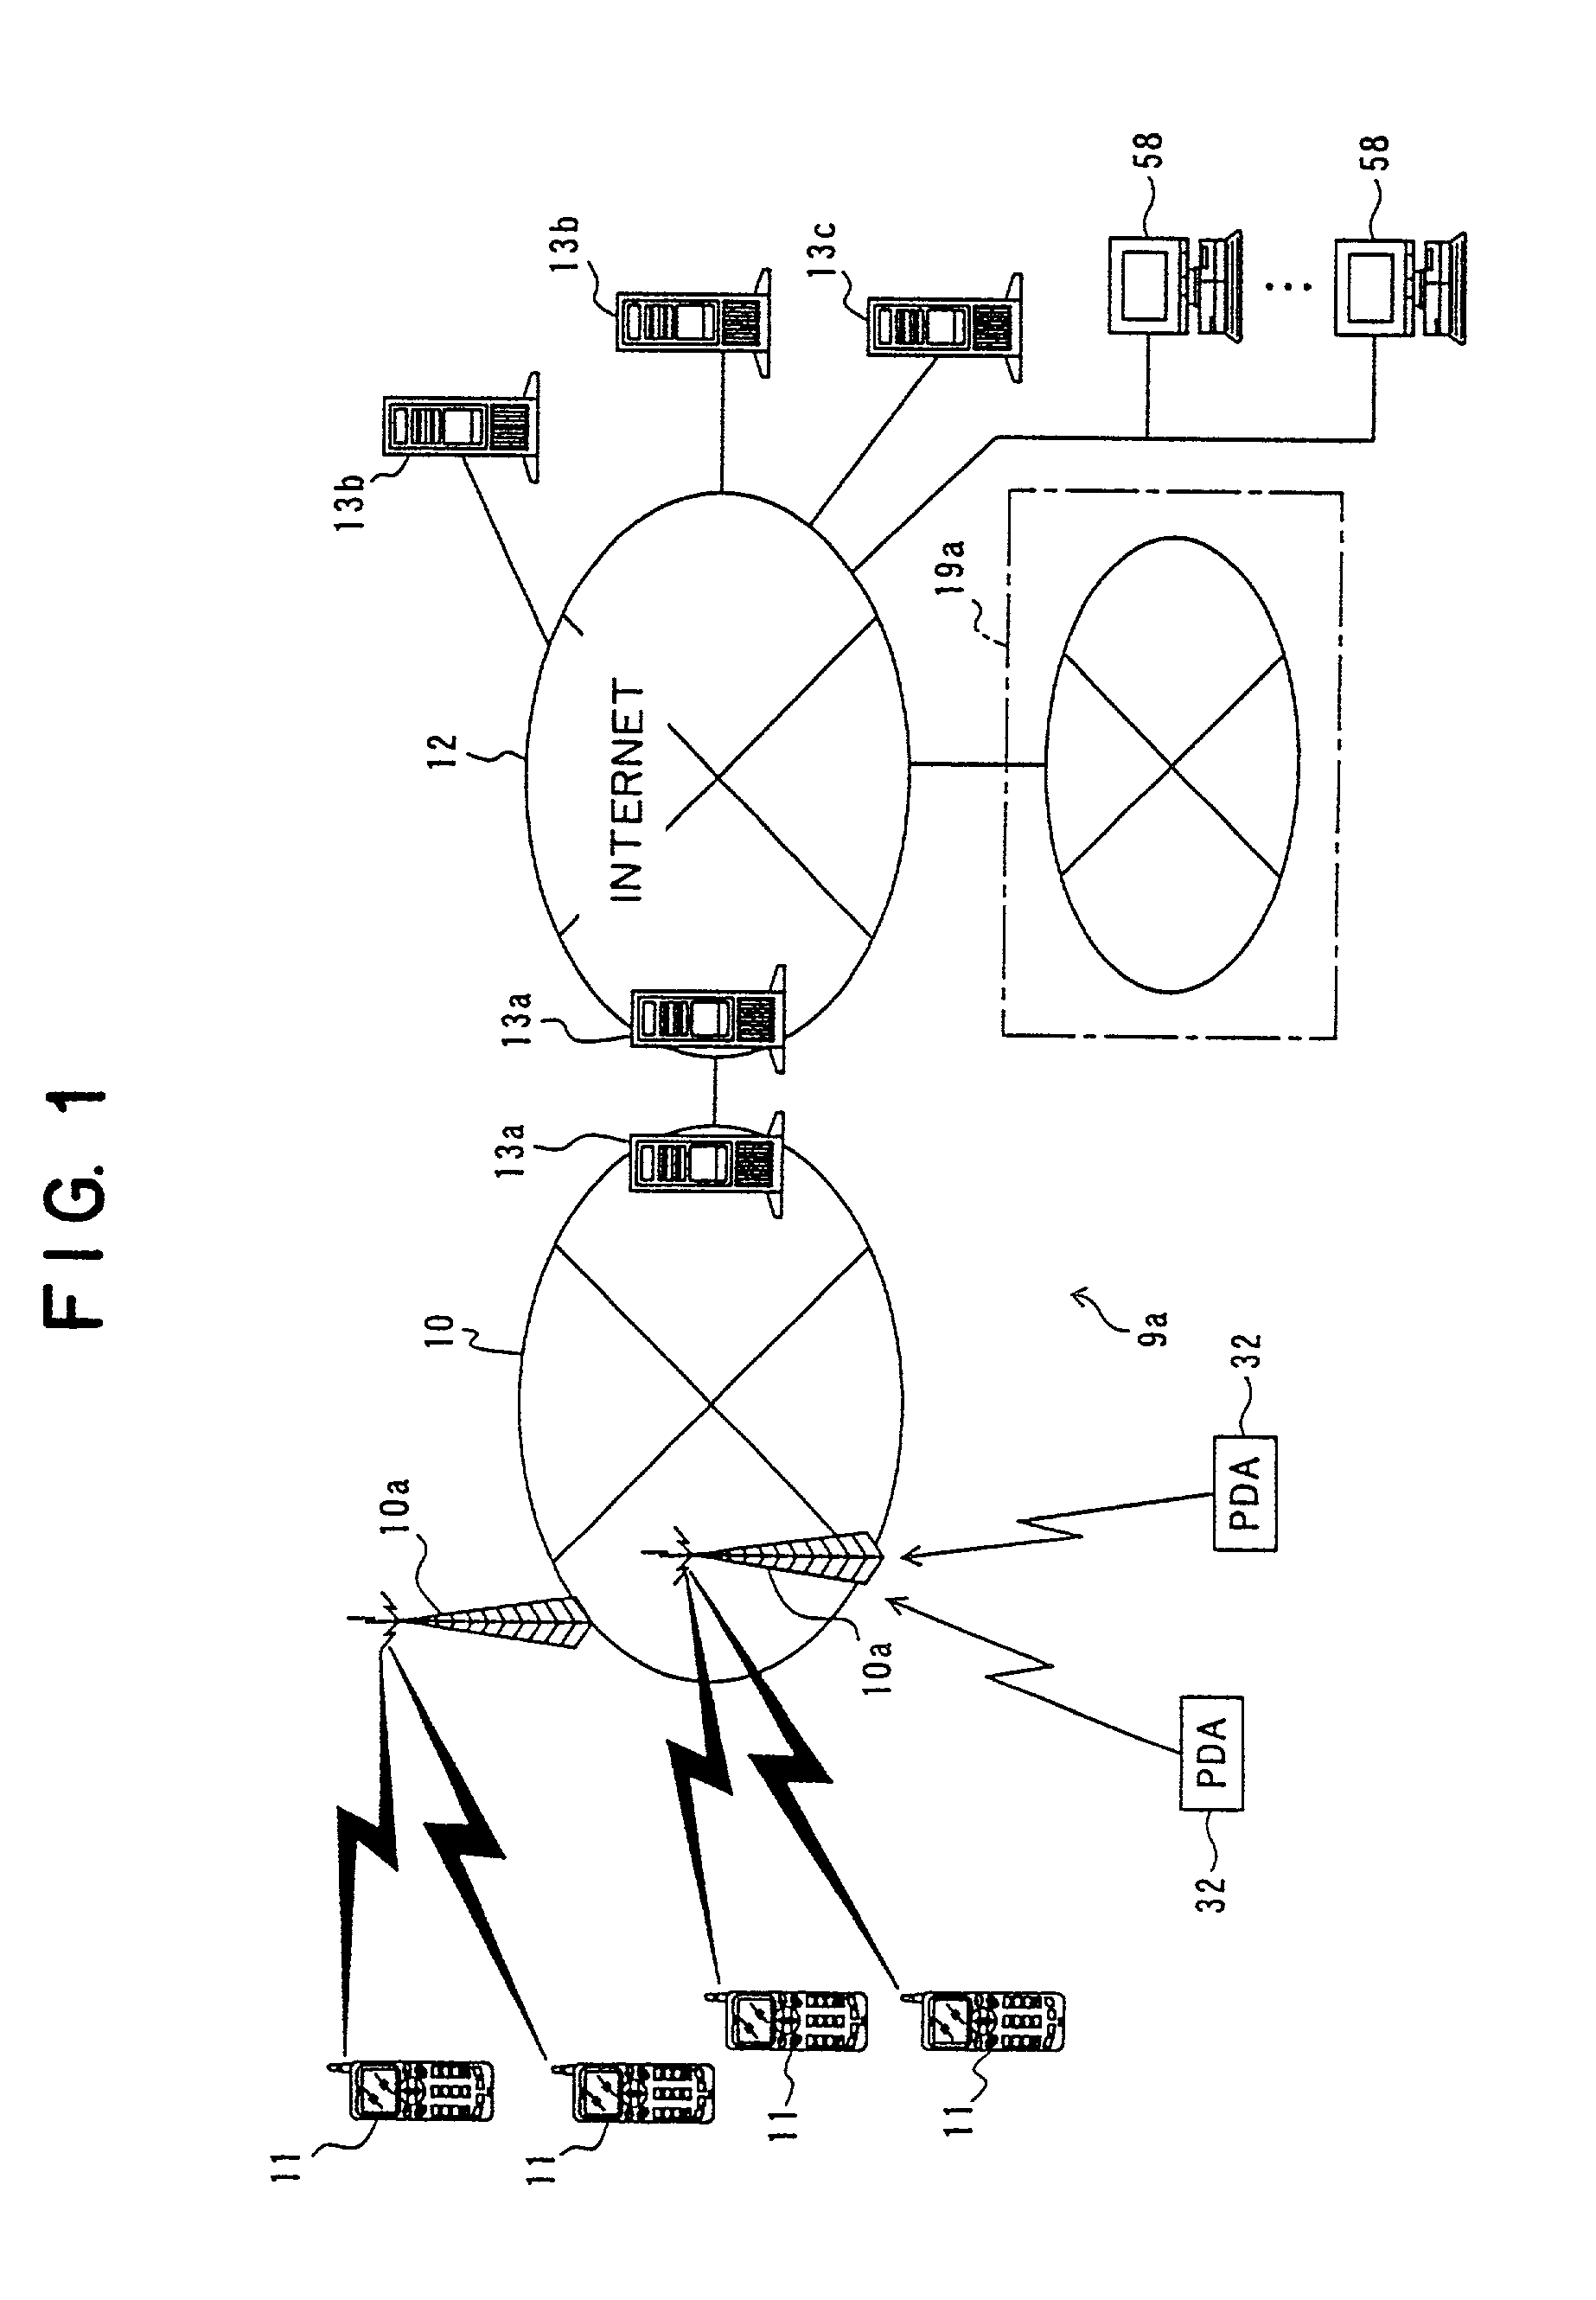 Server, user terminal, information providing service system and information providing service method for providing information in conjunction with a geographical mapping application